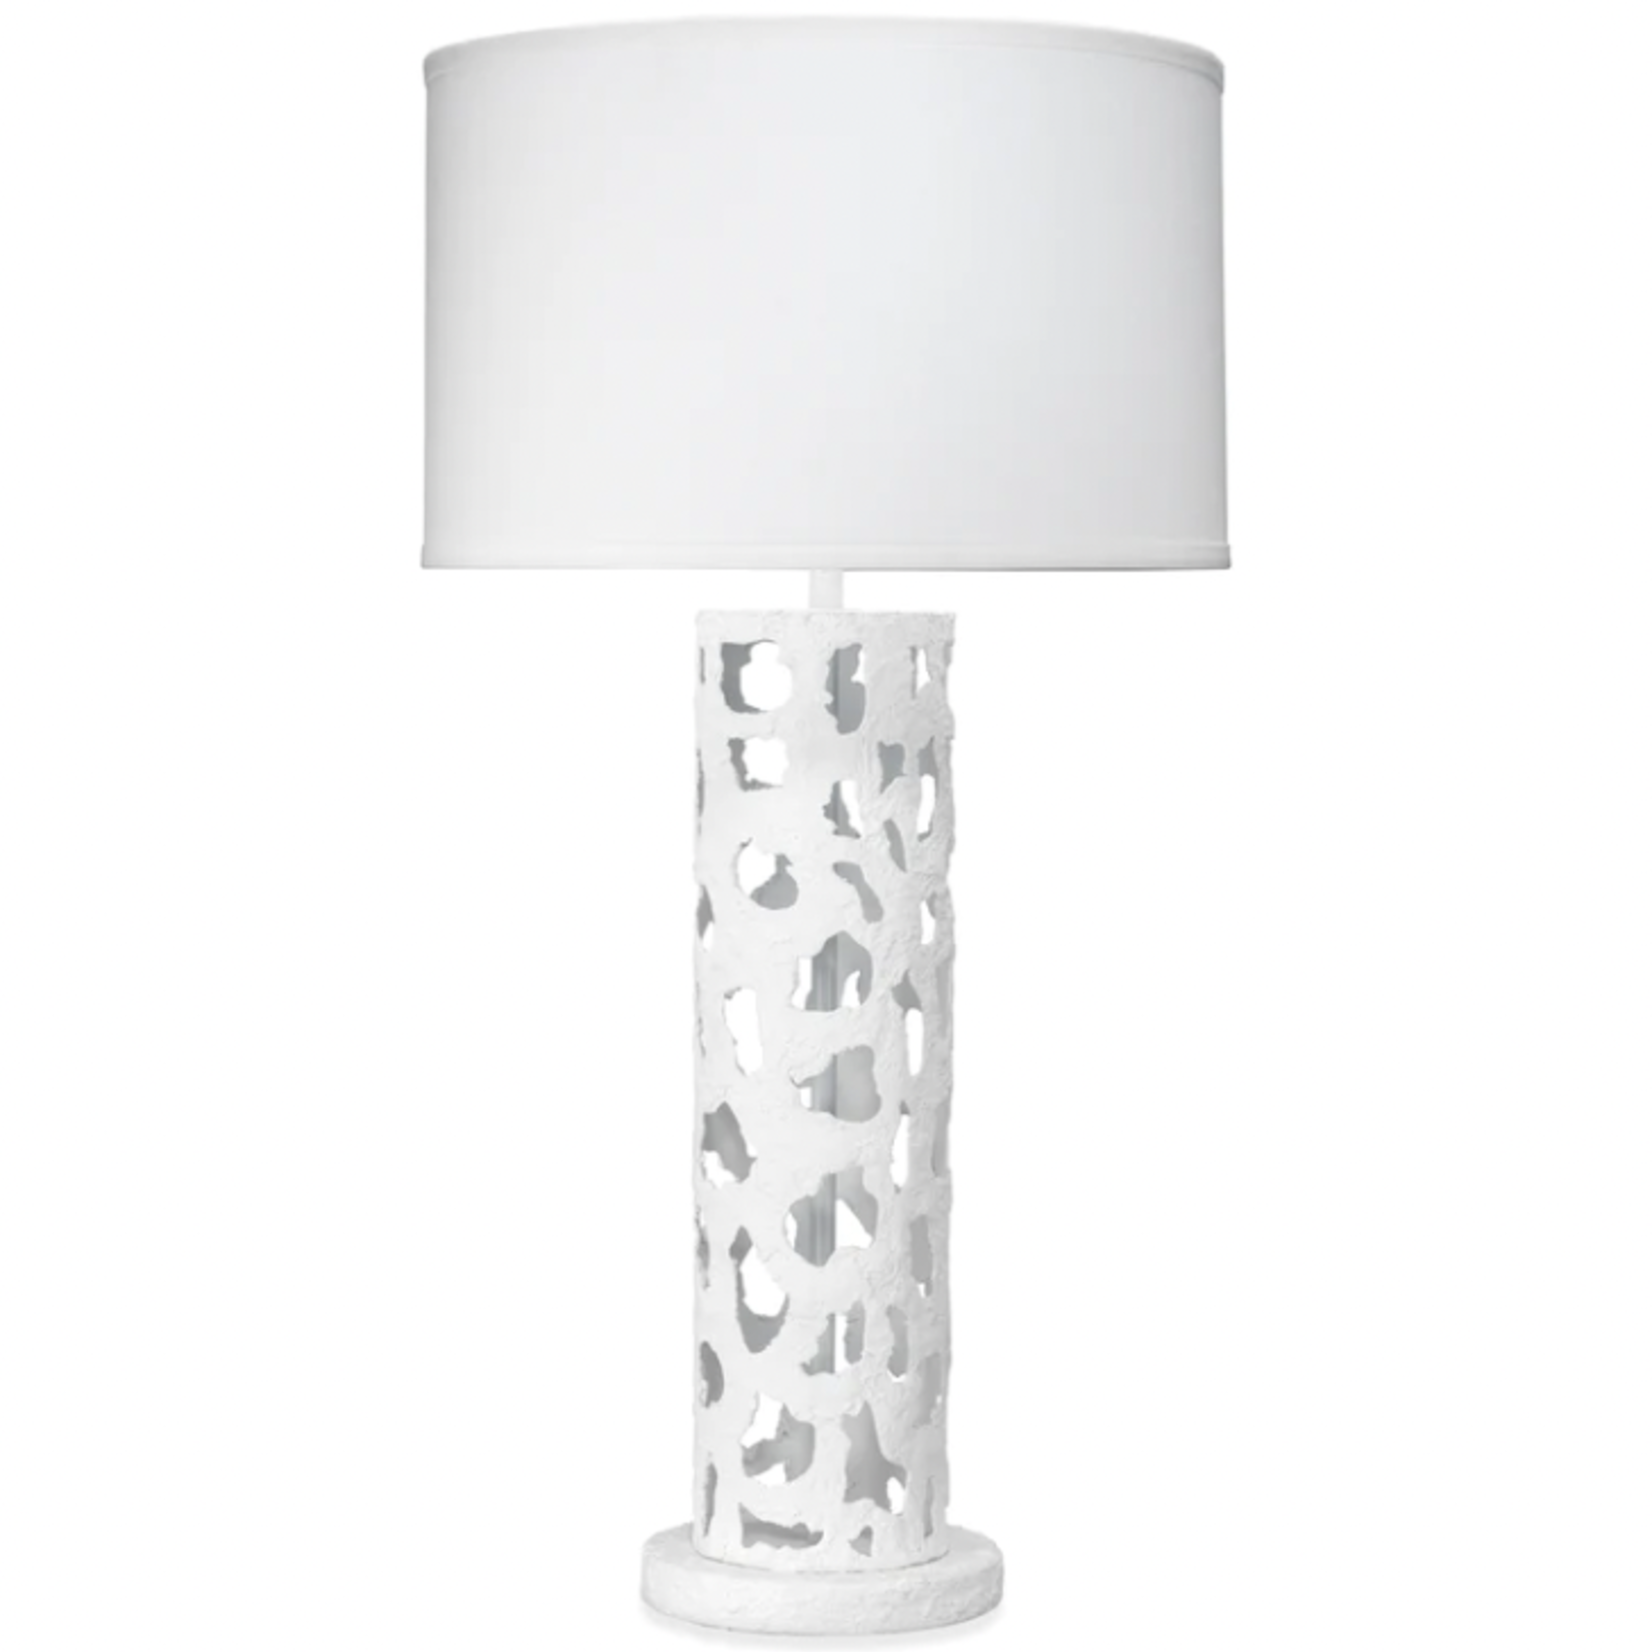 Firenze Table Lamp White Metal